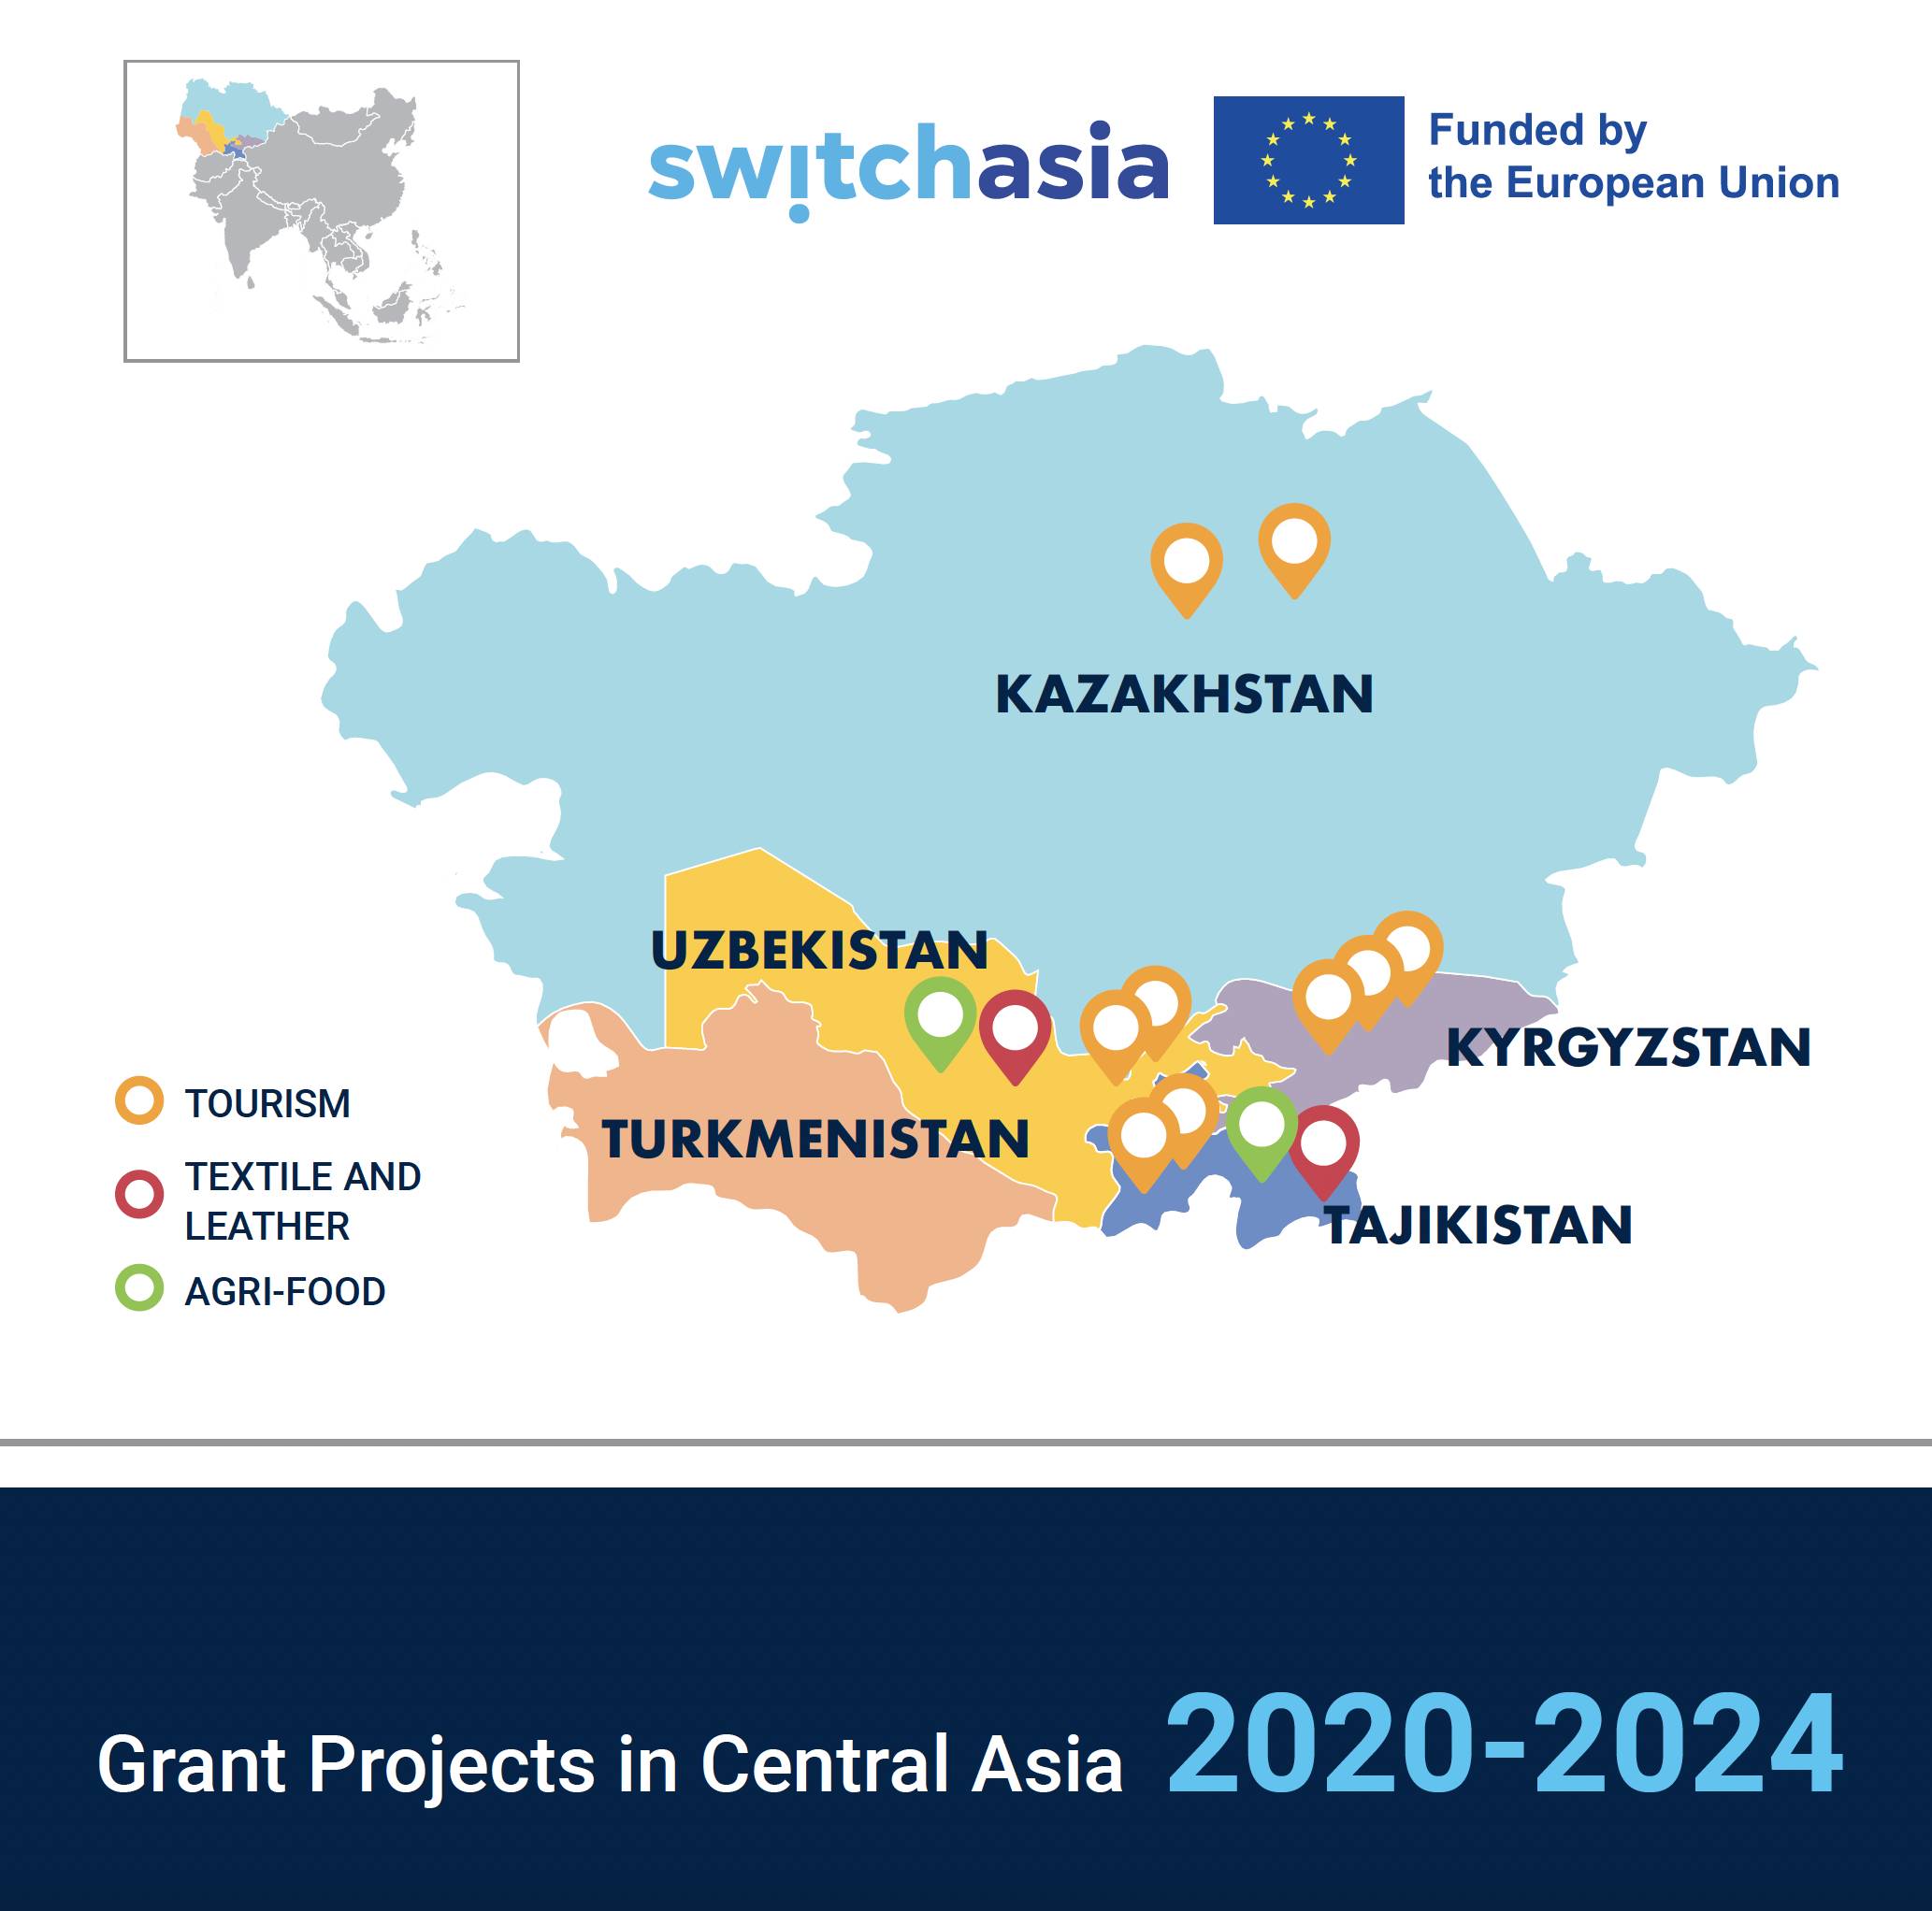 Grant Projects in Central Asia 2020-2024